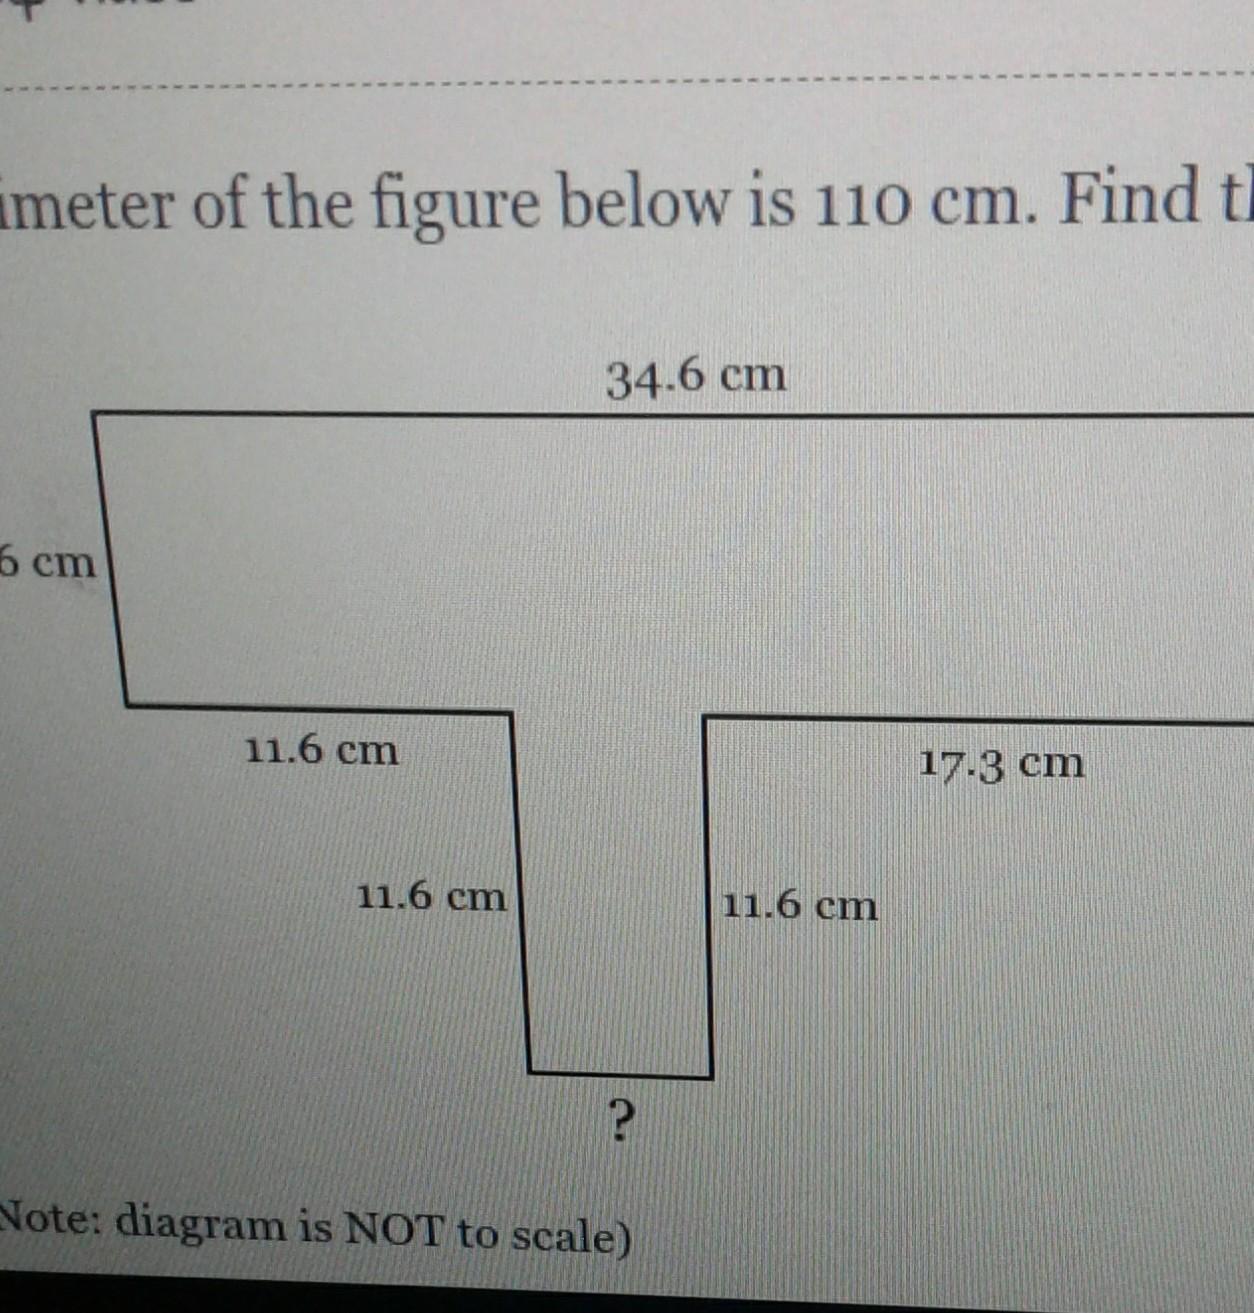 The Permeter Of Then Figure Below Is 110cm.Find The Length Of The Missing Side.